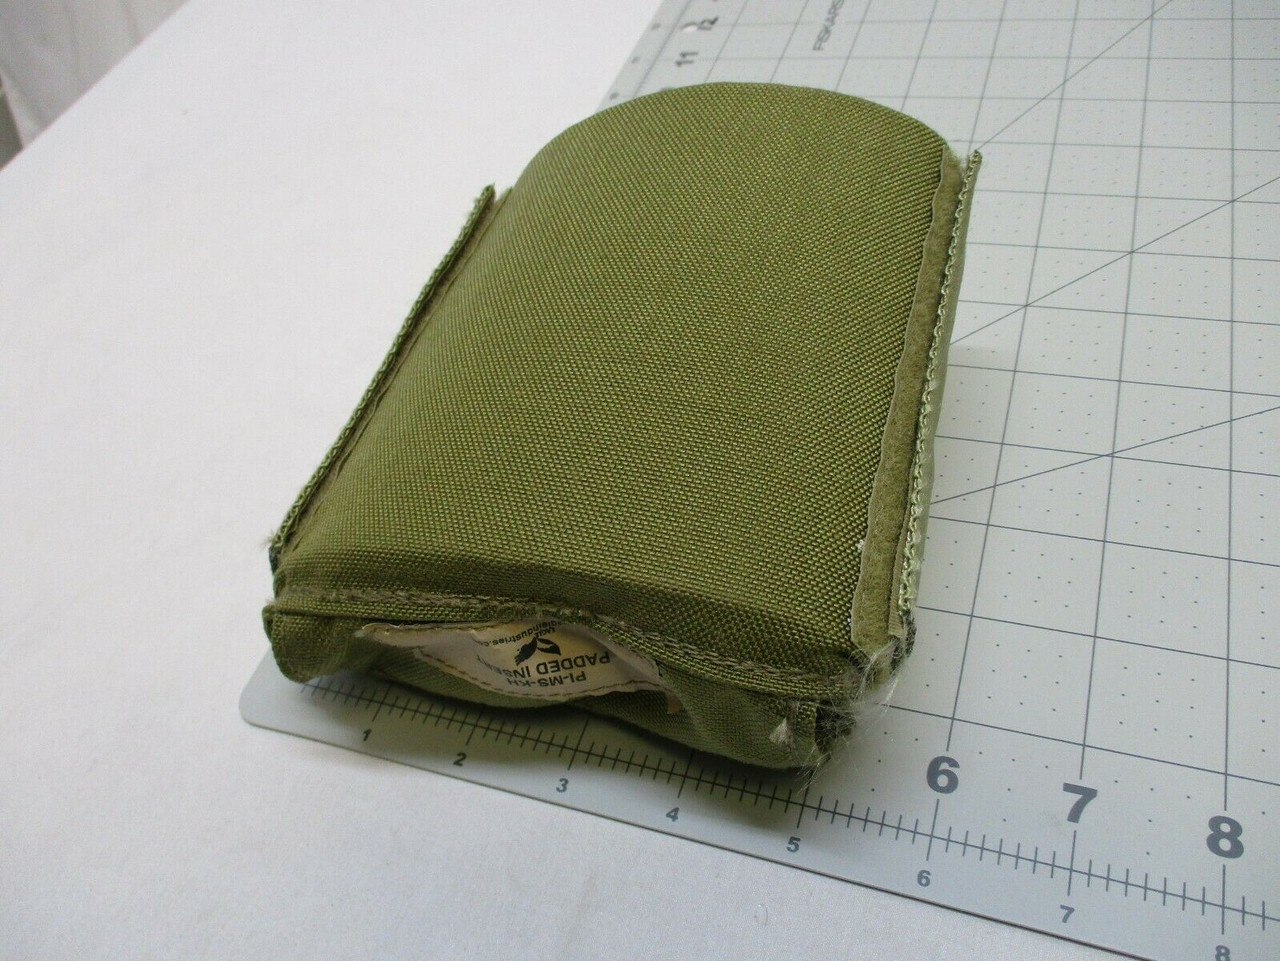 EAGLE INDUSTRIES MILITARY 1 QUART CANTEEN POUCH PVS 14 PADDED INSERT COYOTE/TAN